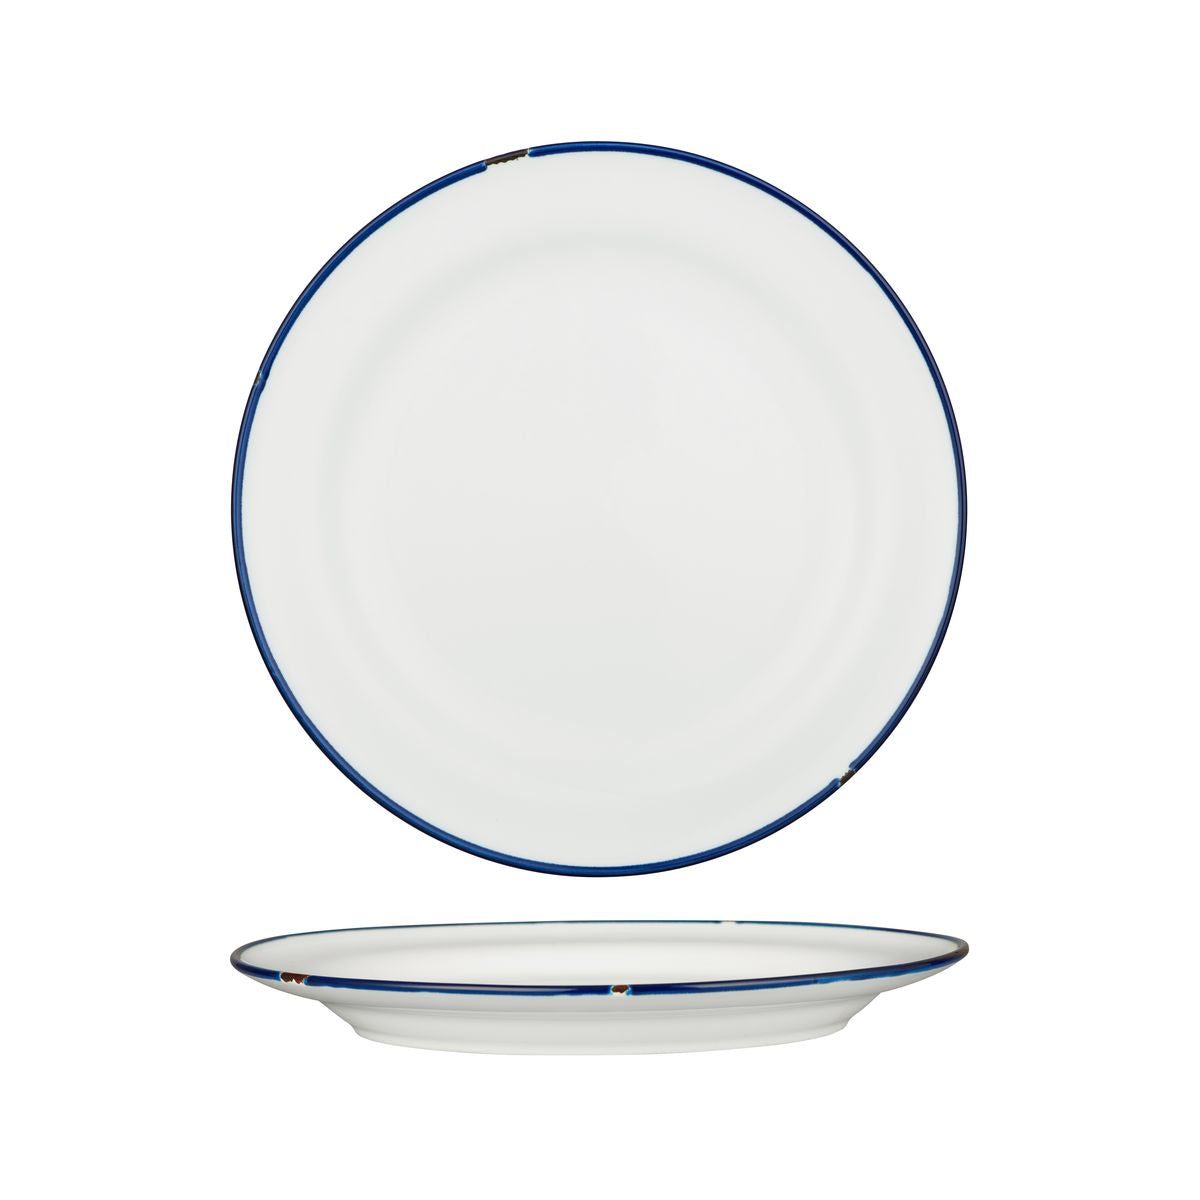 Round Plate - 270mm, Tintin White & Navy from Luzerne. made out of Ceramic and sold in boxes of 12. Hospitality quality at wholesale price with The Flying Fork! 